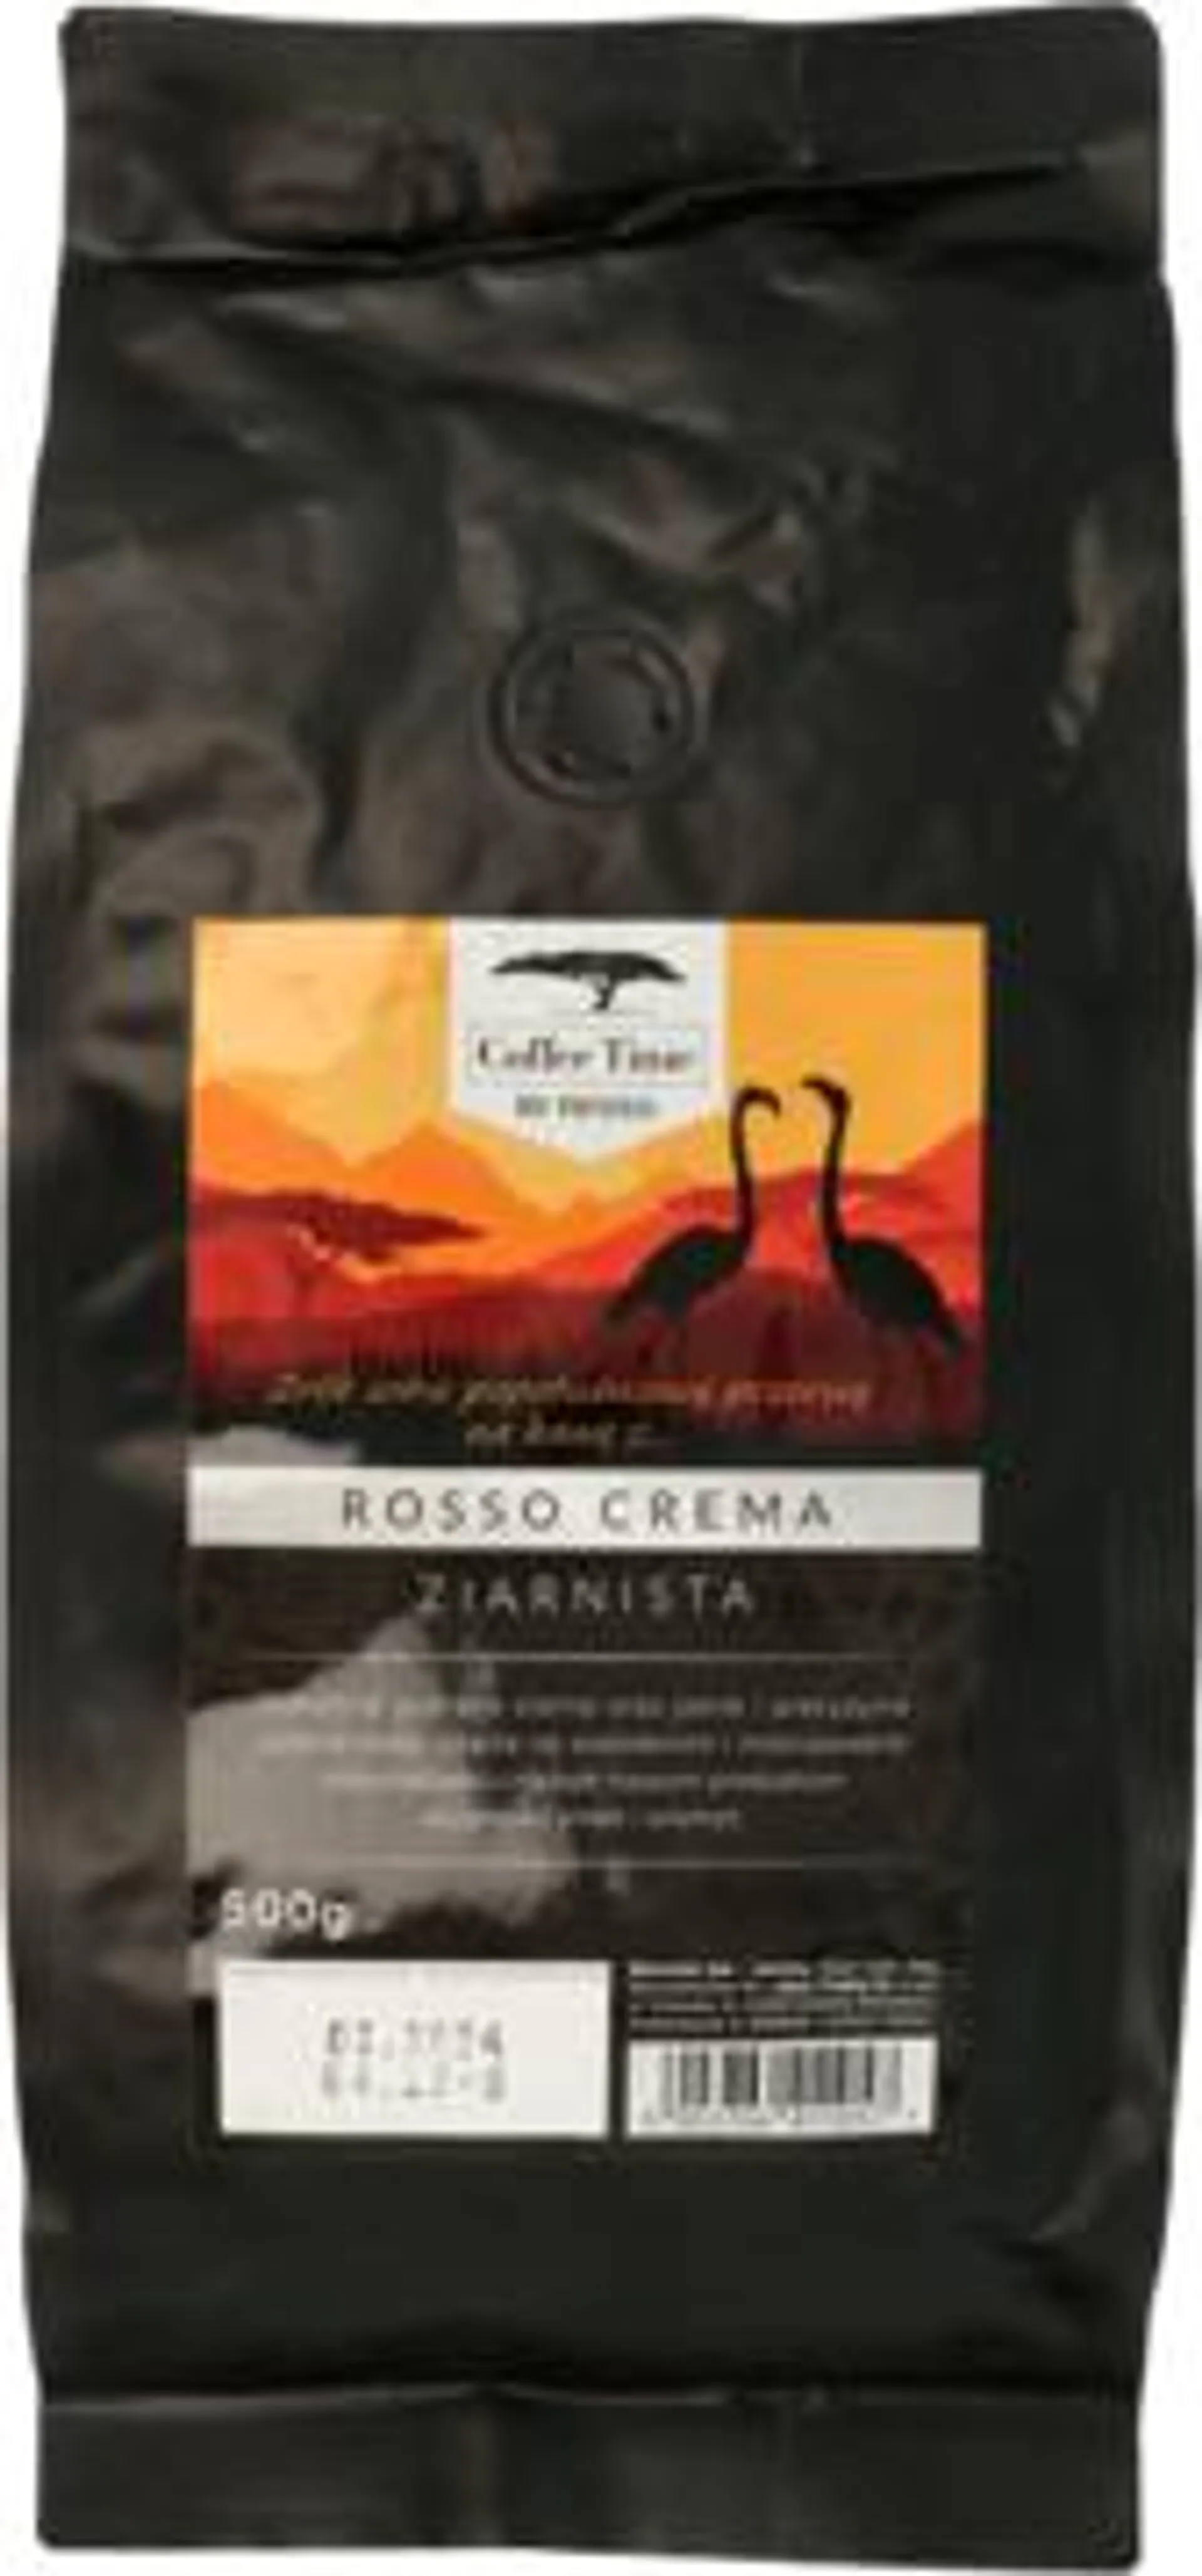 COFFEE TIME BY ROSSO kawa ziarnista, Rosso Crema 500 g, nr kat. 379321